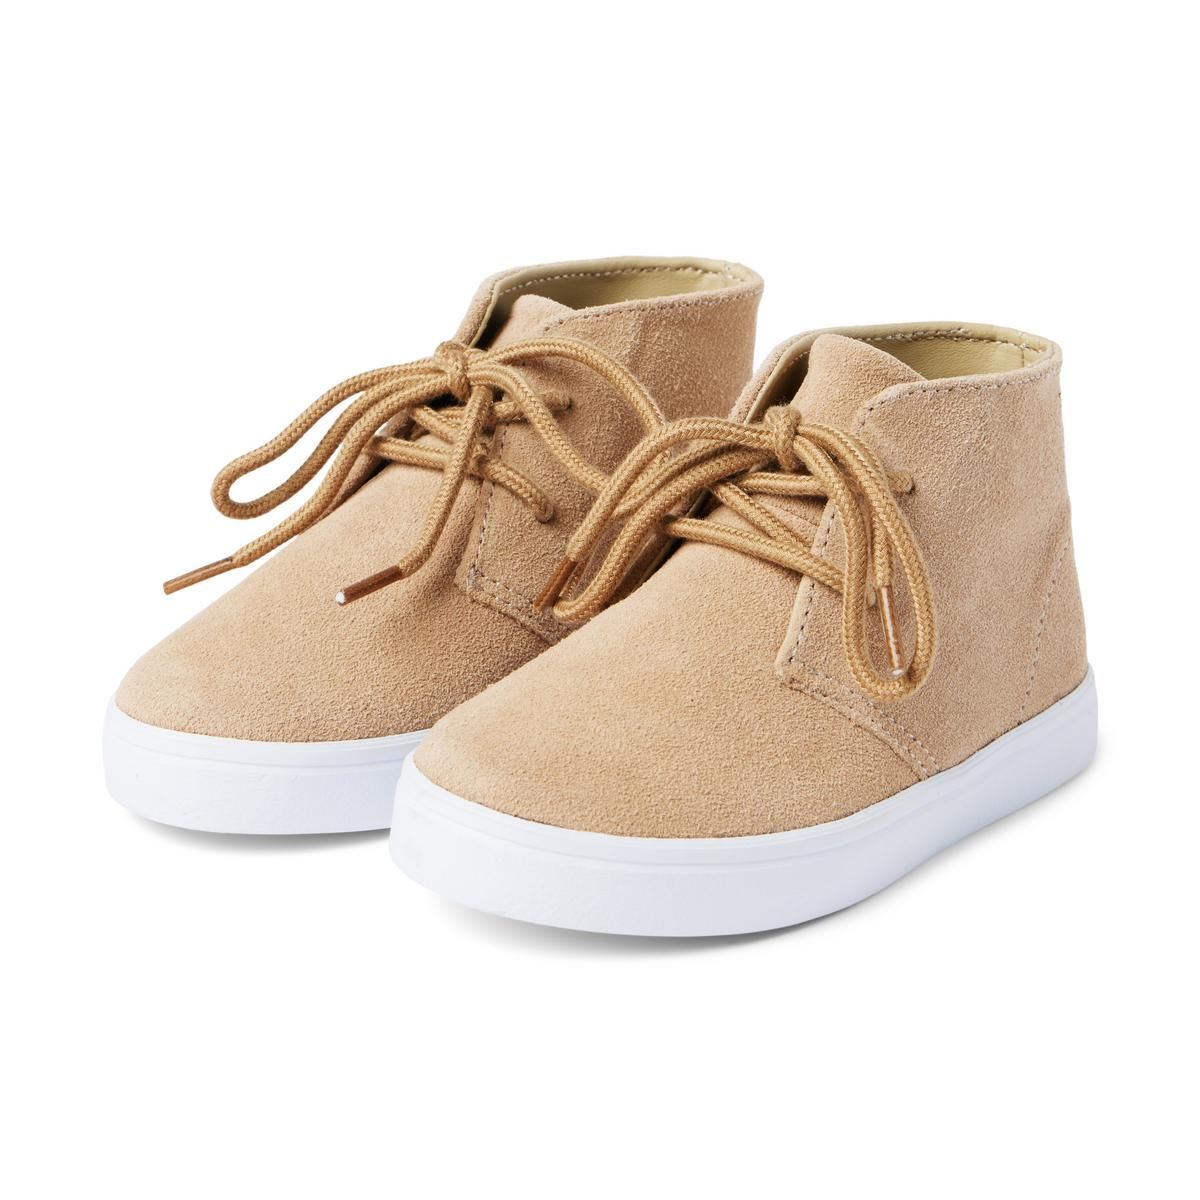 Suede Chukka Sneaker | Janie and Jack